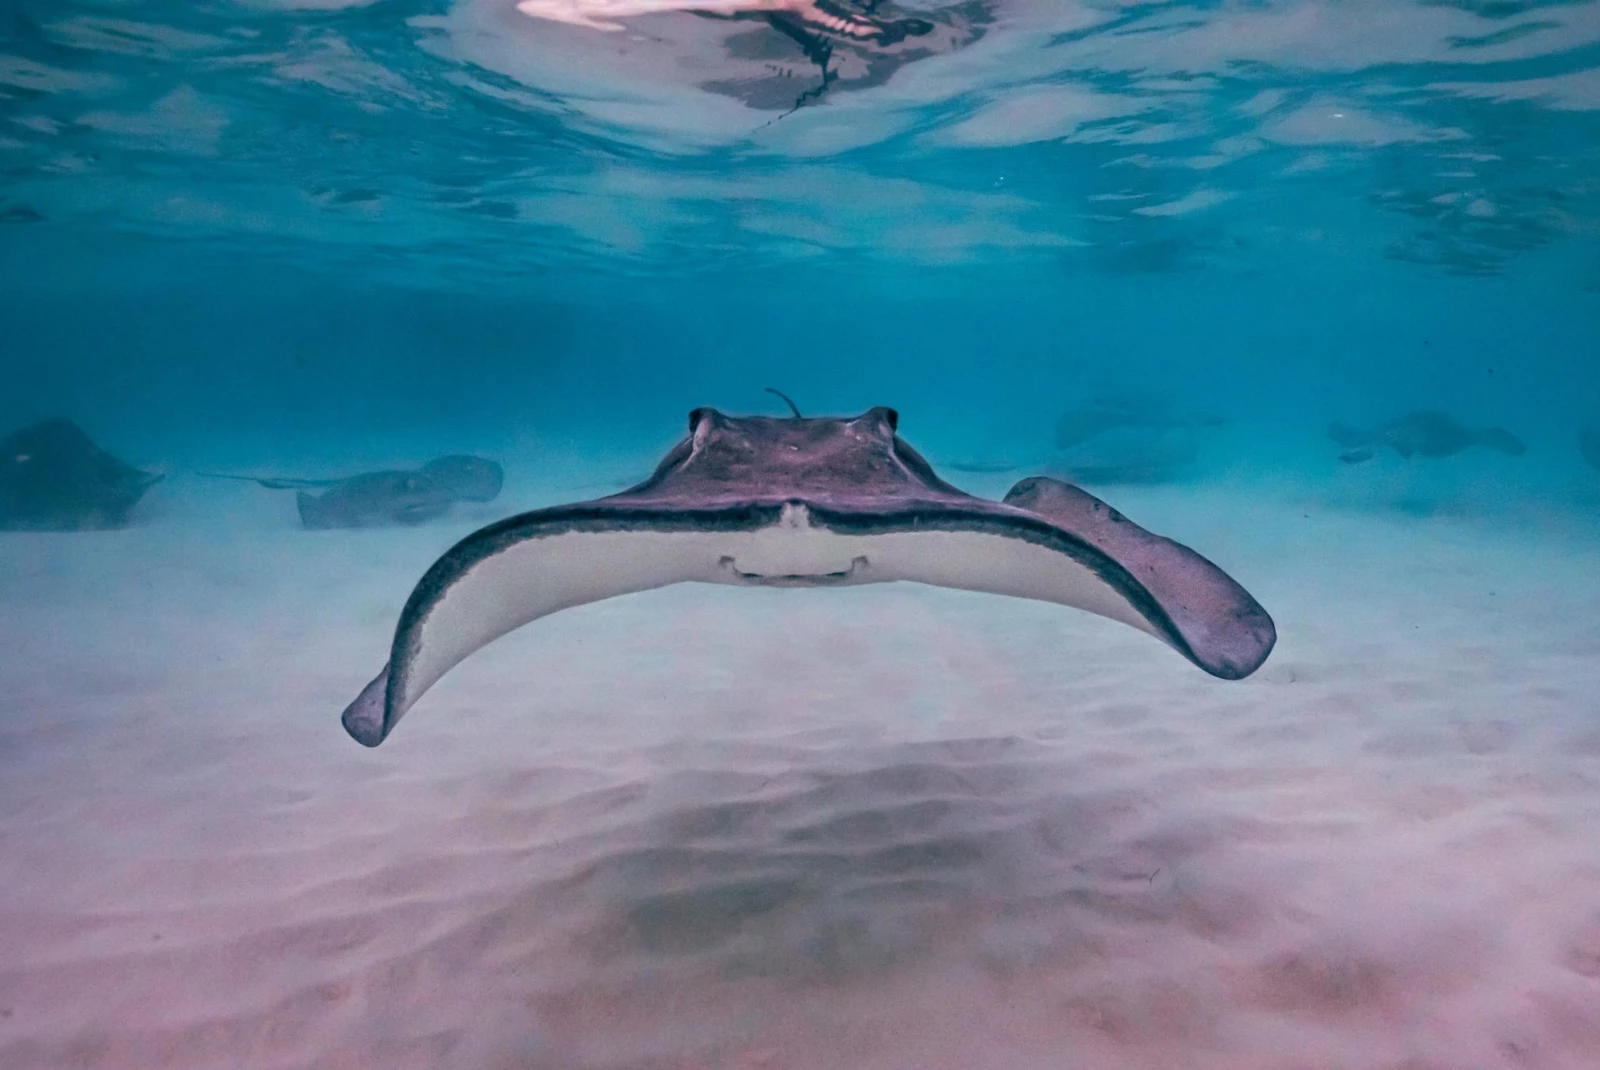 a stingray swims under the shallow ocean water with a smile